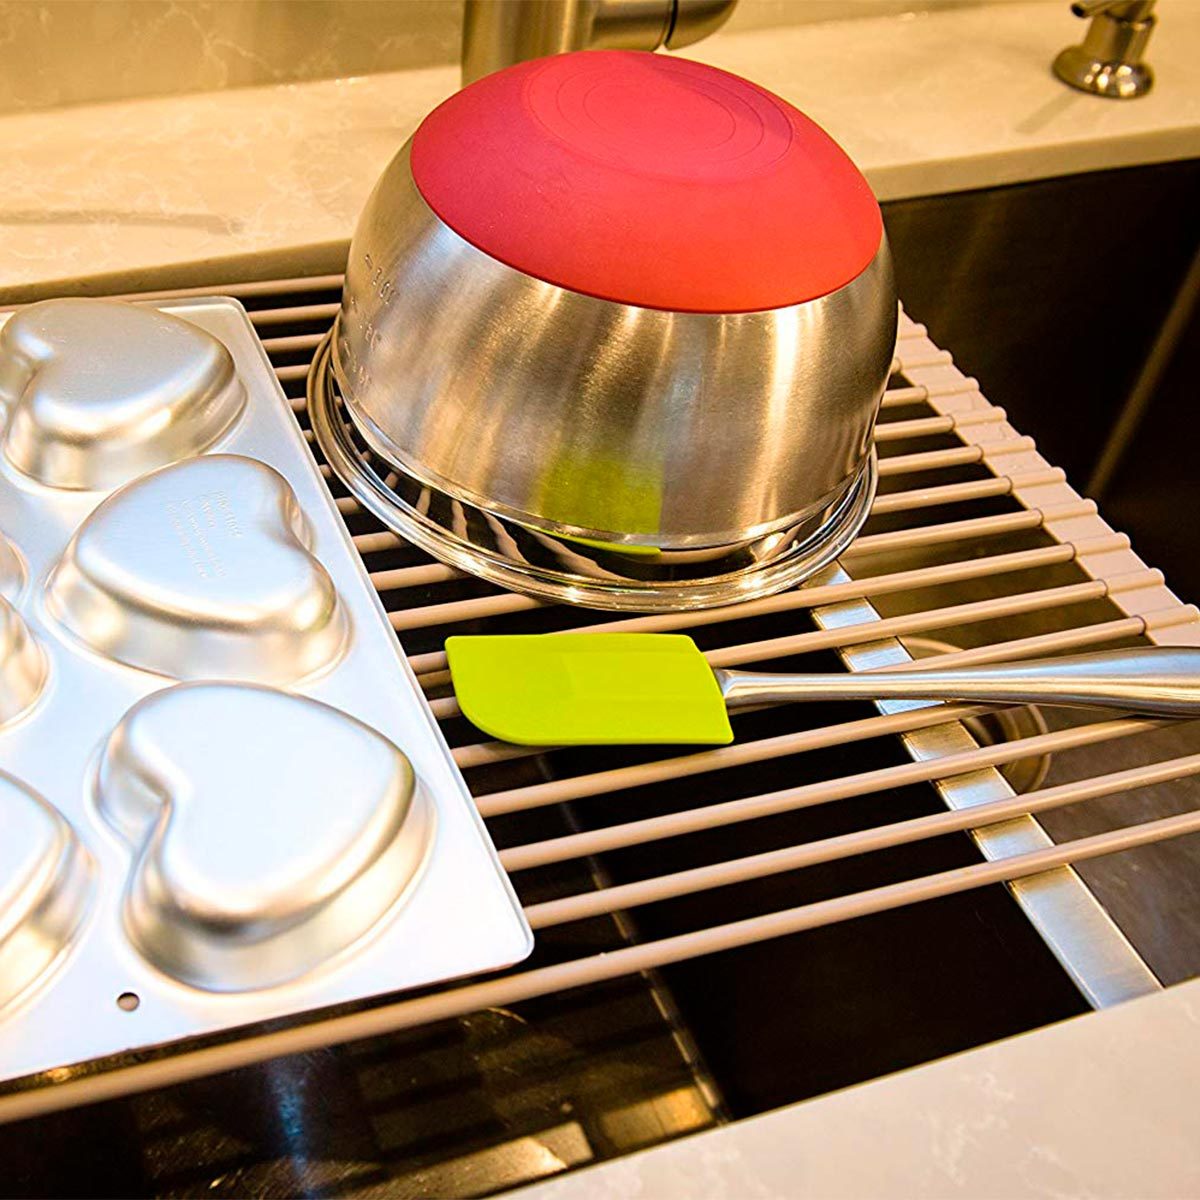 No Dishwasher? These are Our 10 Favorite Dish Drying Racks